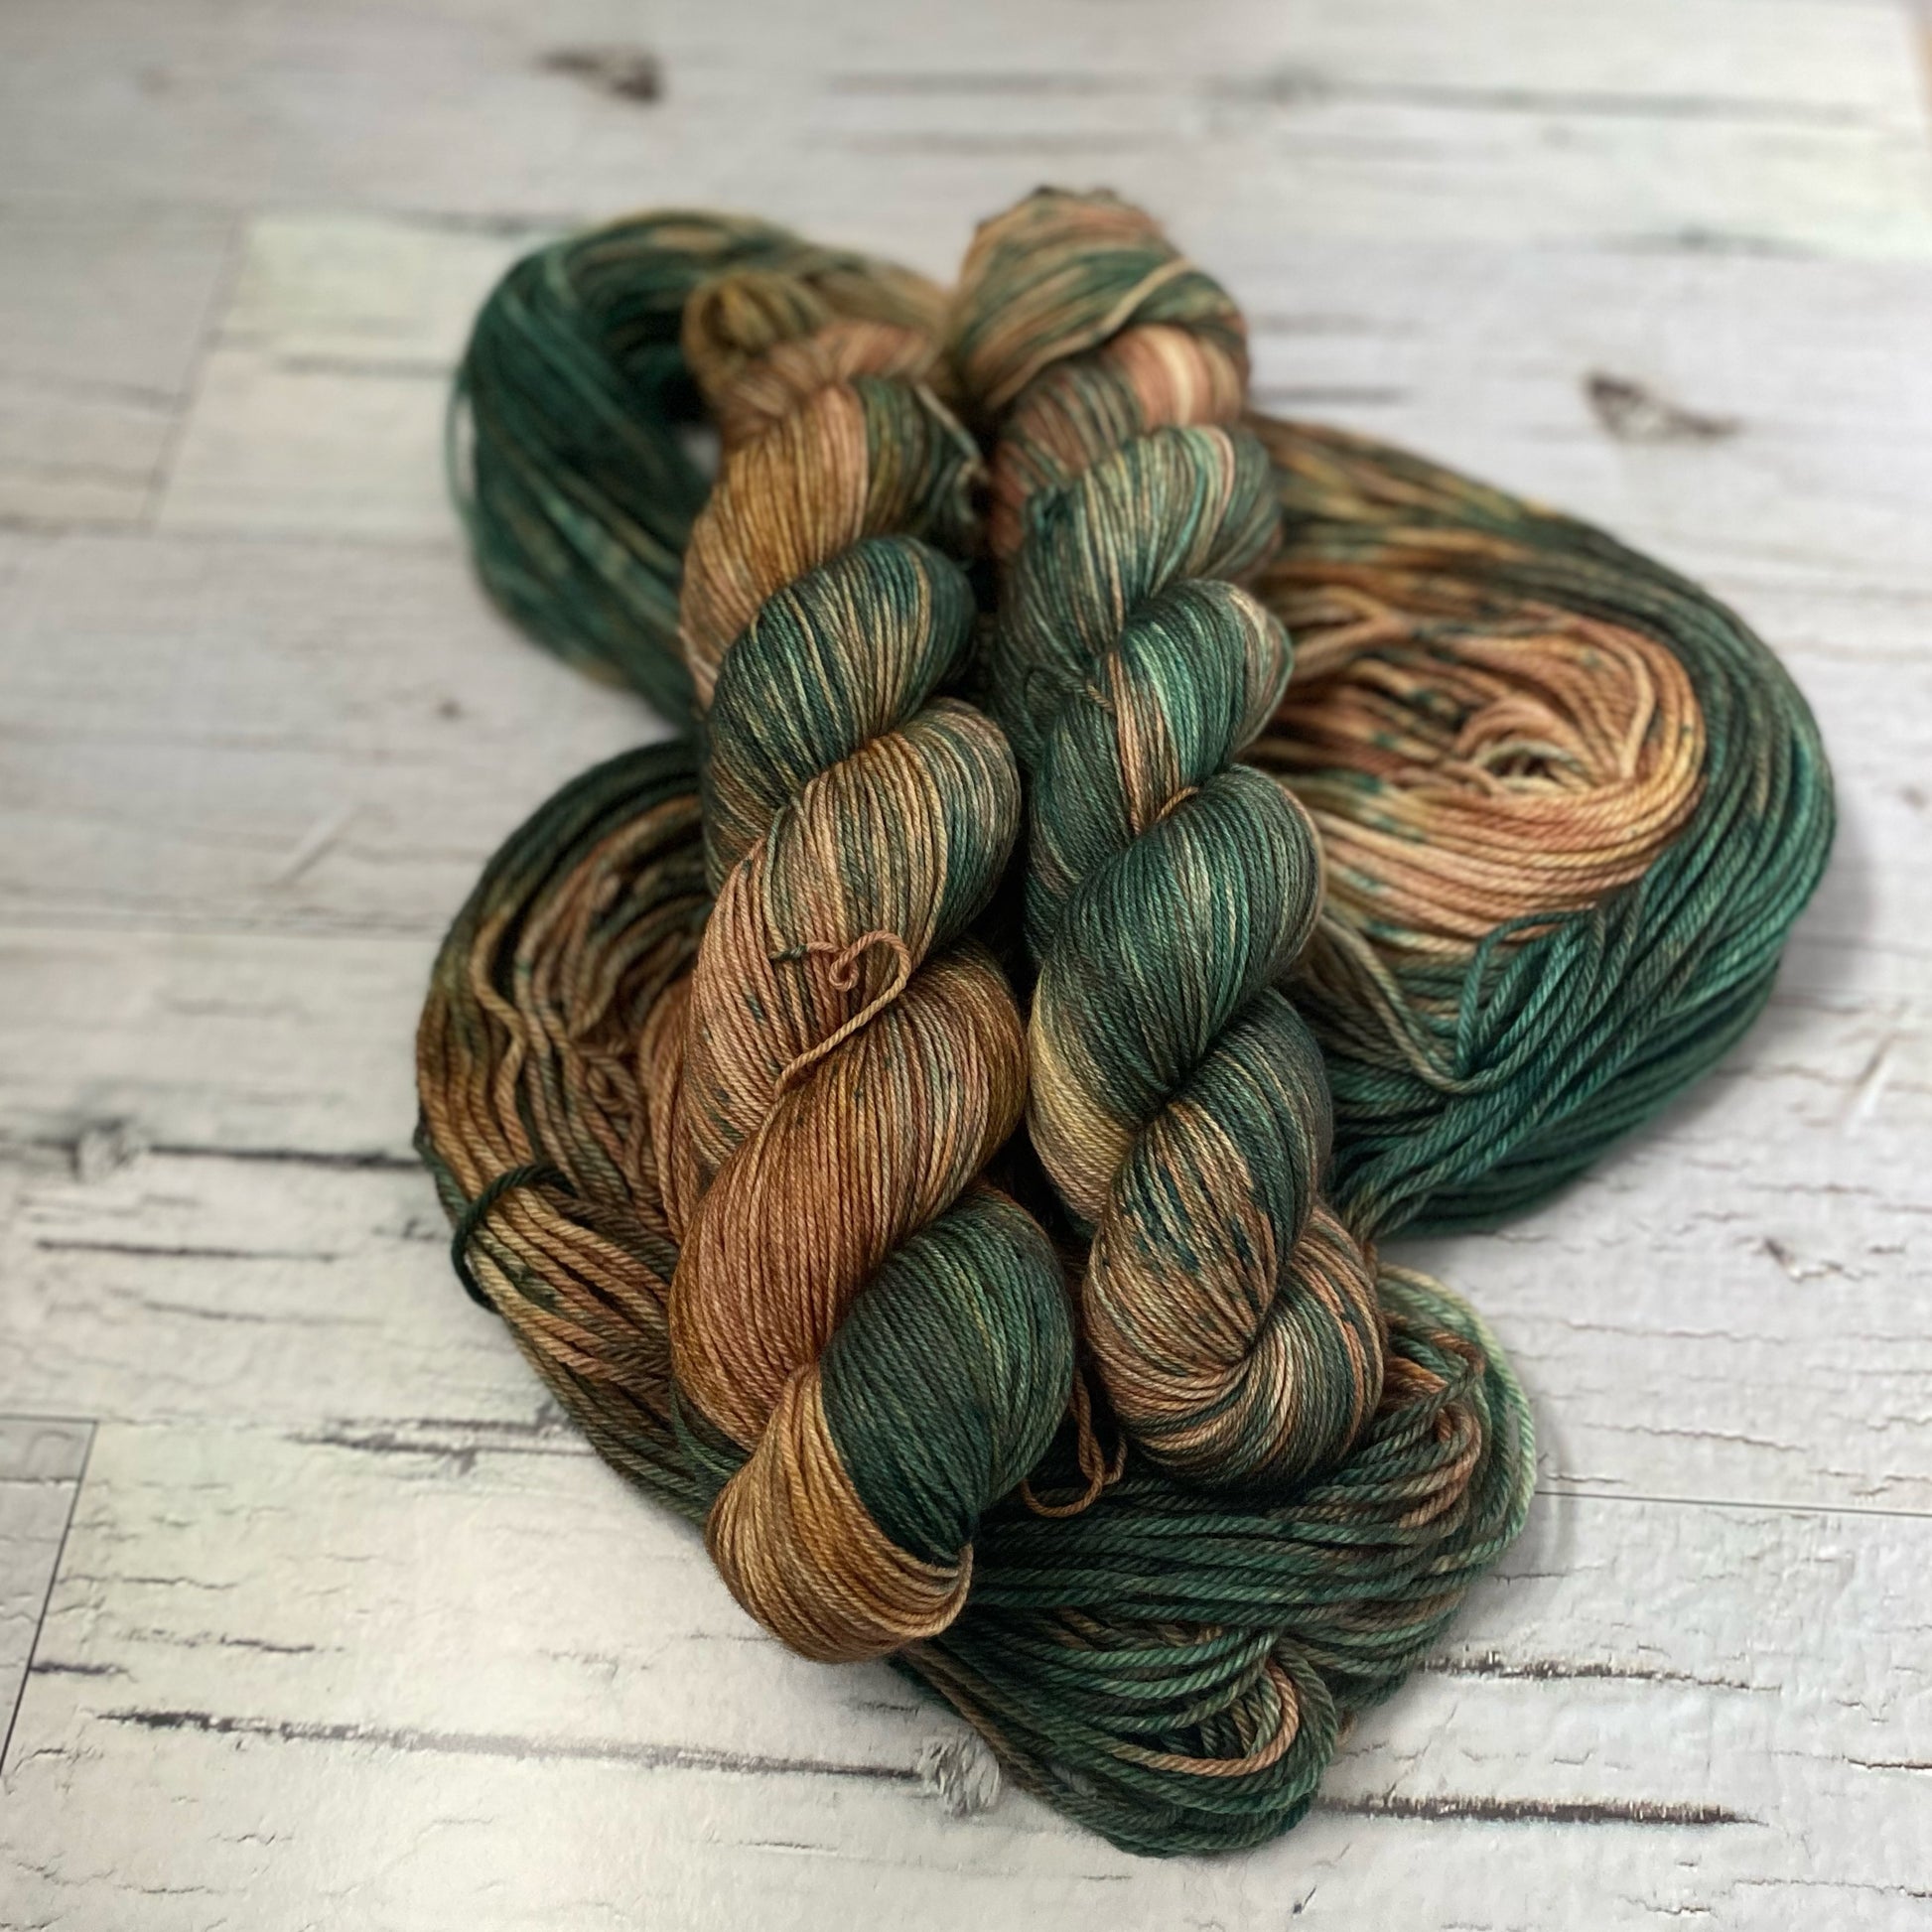 Two skeins of brown and green variegated yarn on a third hank of yarn laid out underneath them. 